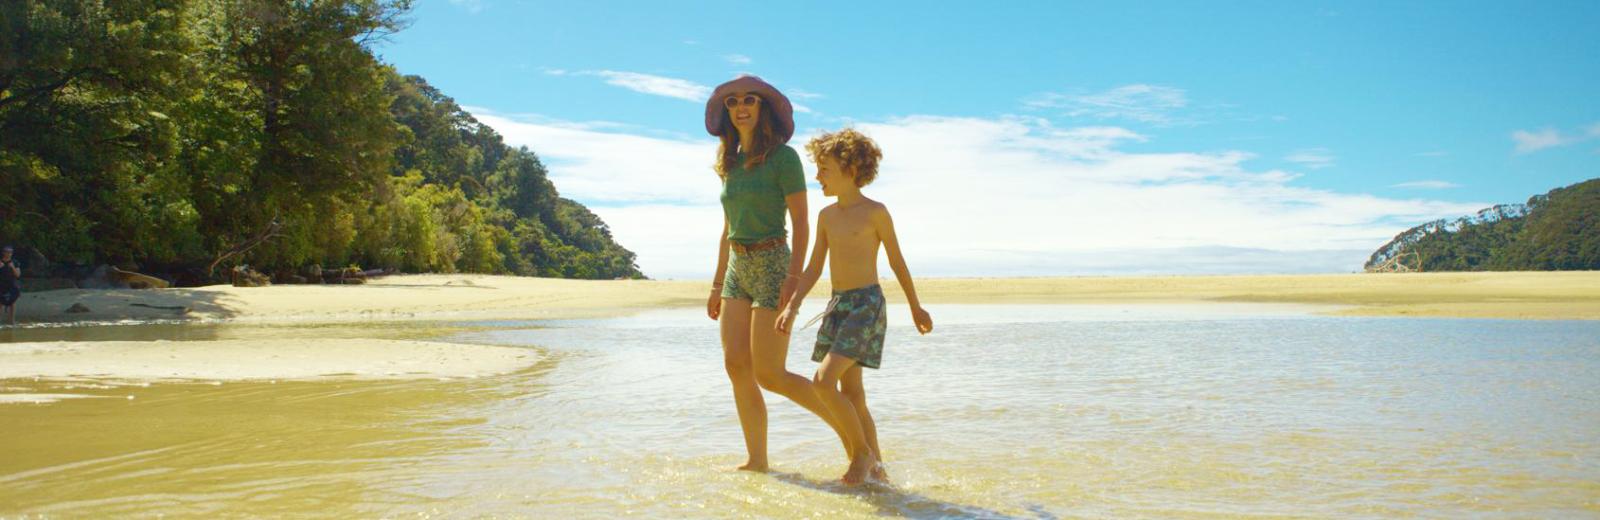 New Zealand Family Holidays and Tours